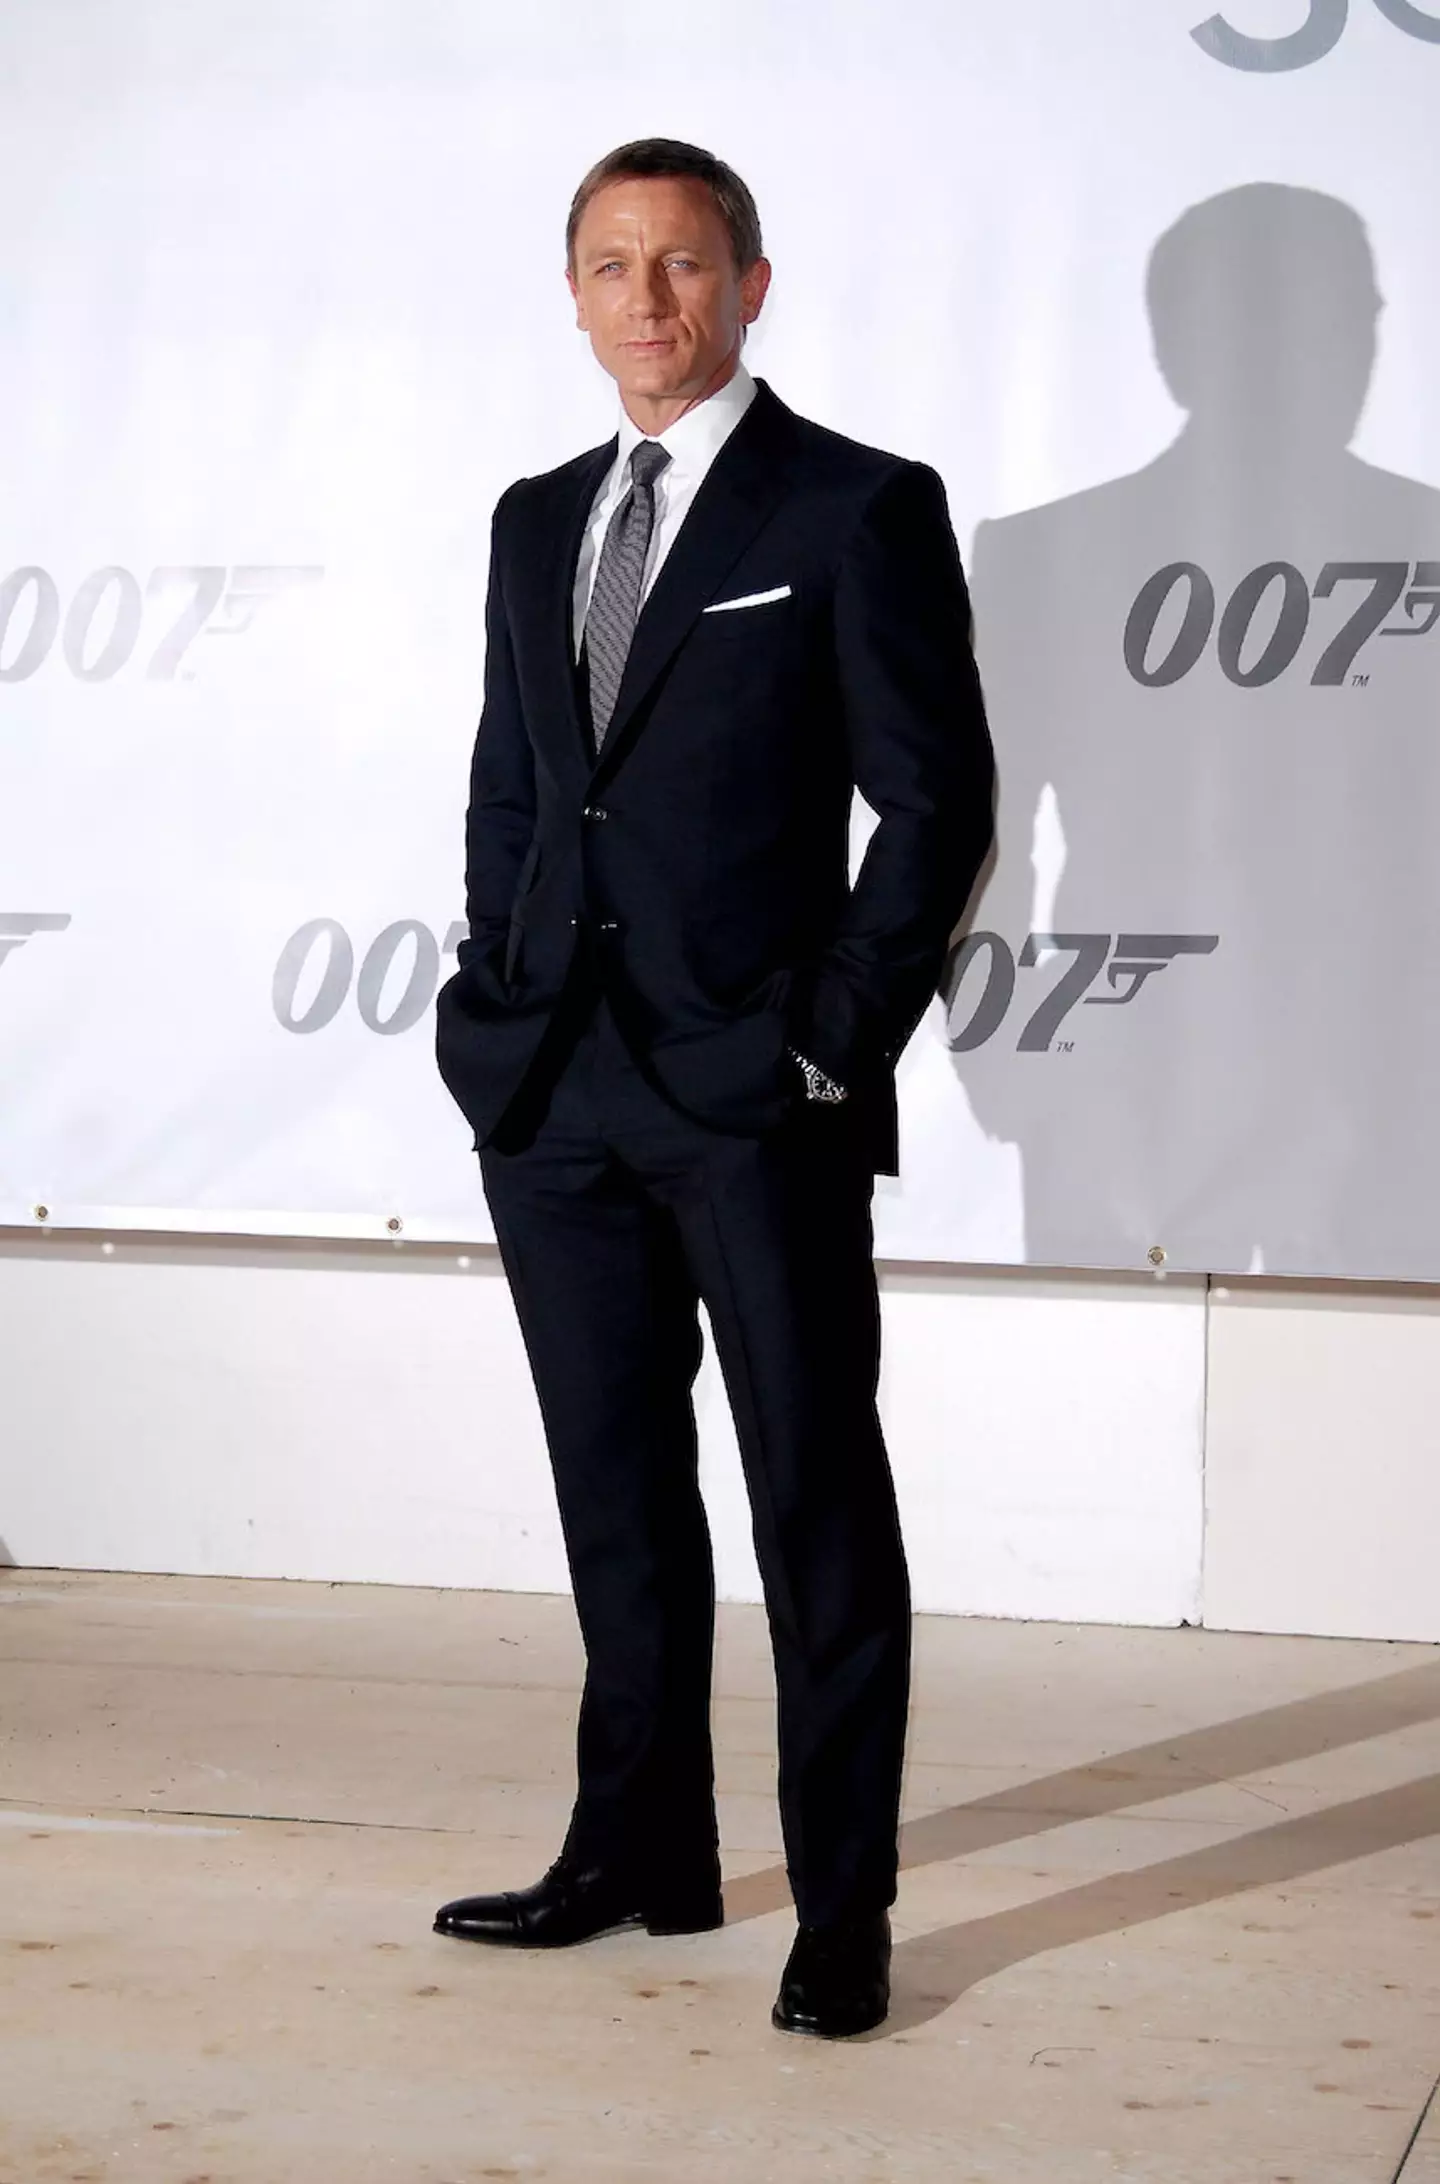 Daniel Craig's portrayal of James Bond will certainly be a tough act to follow.